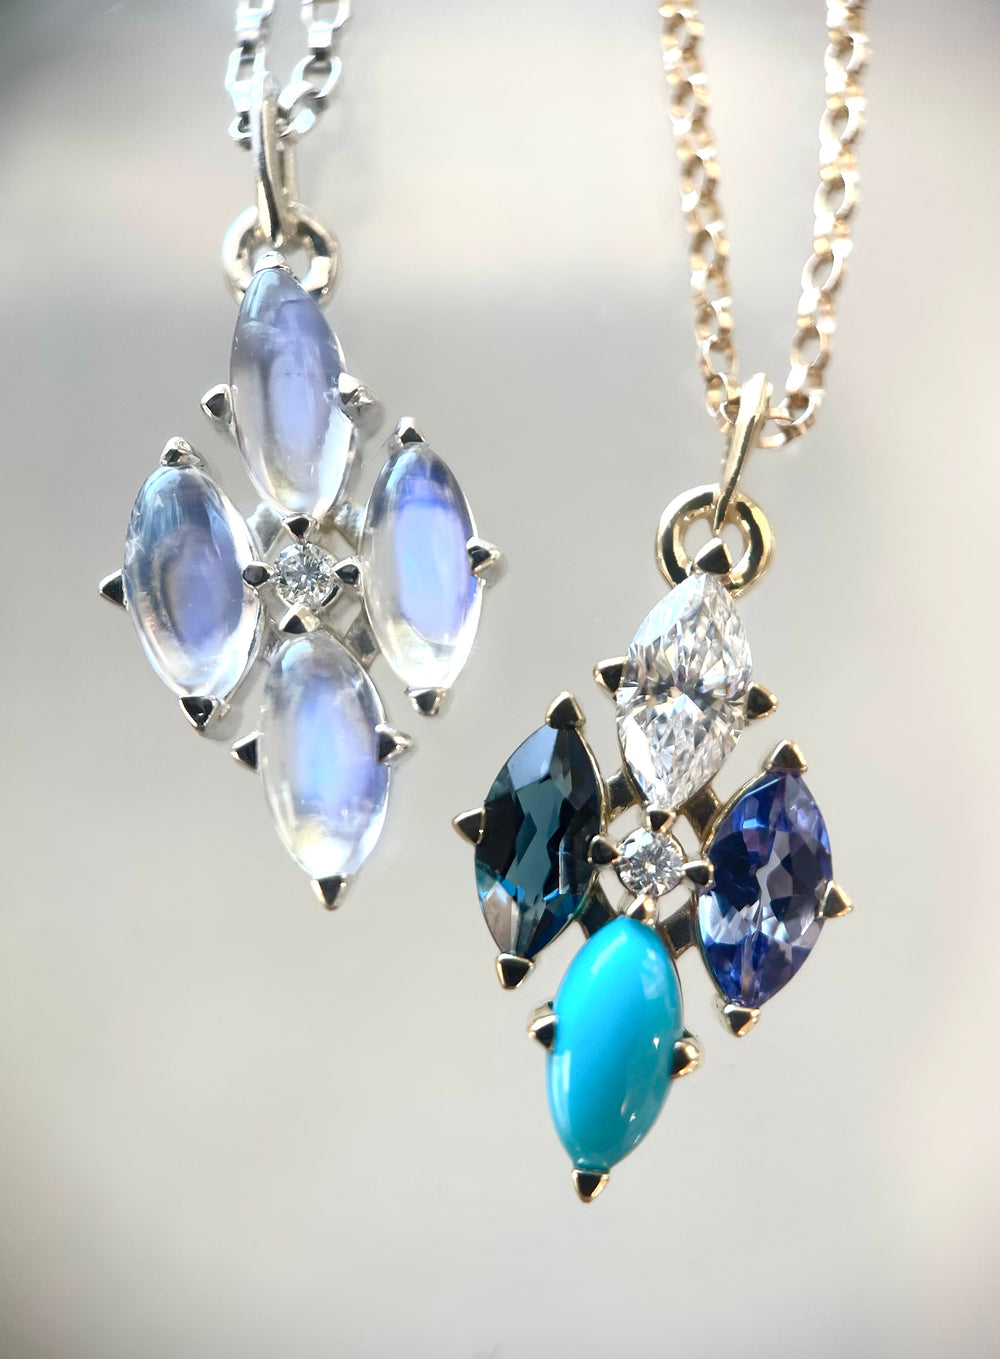 Marquise Birthstone/Gemstone Necklace - Create Your Own